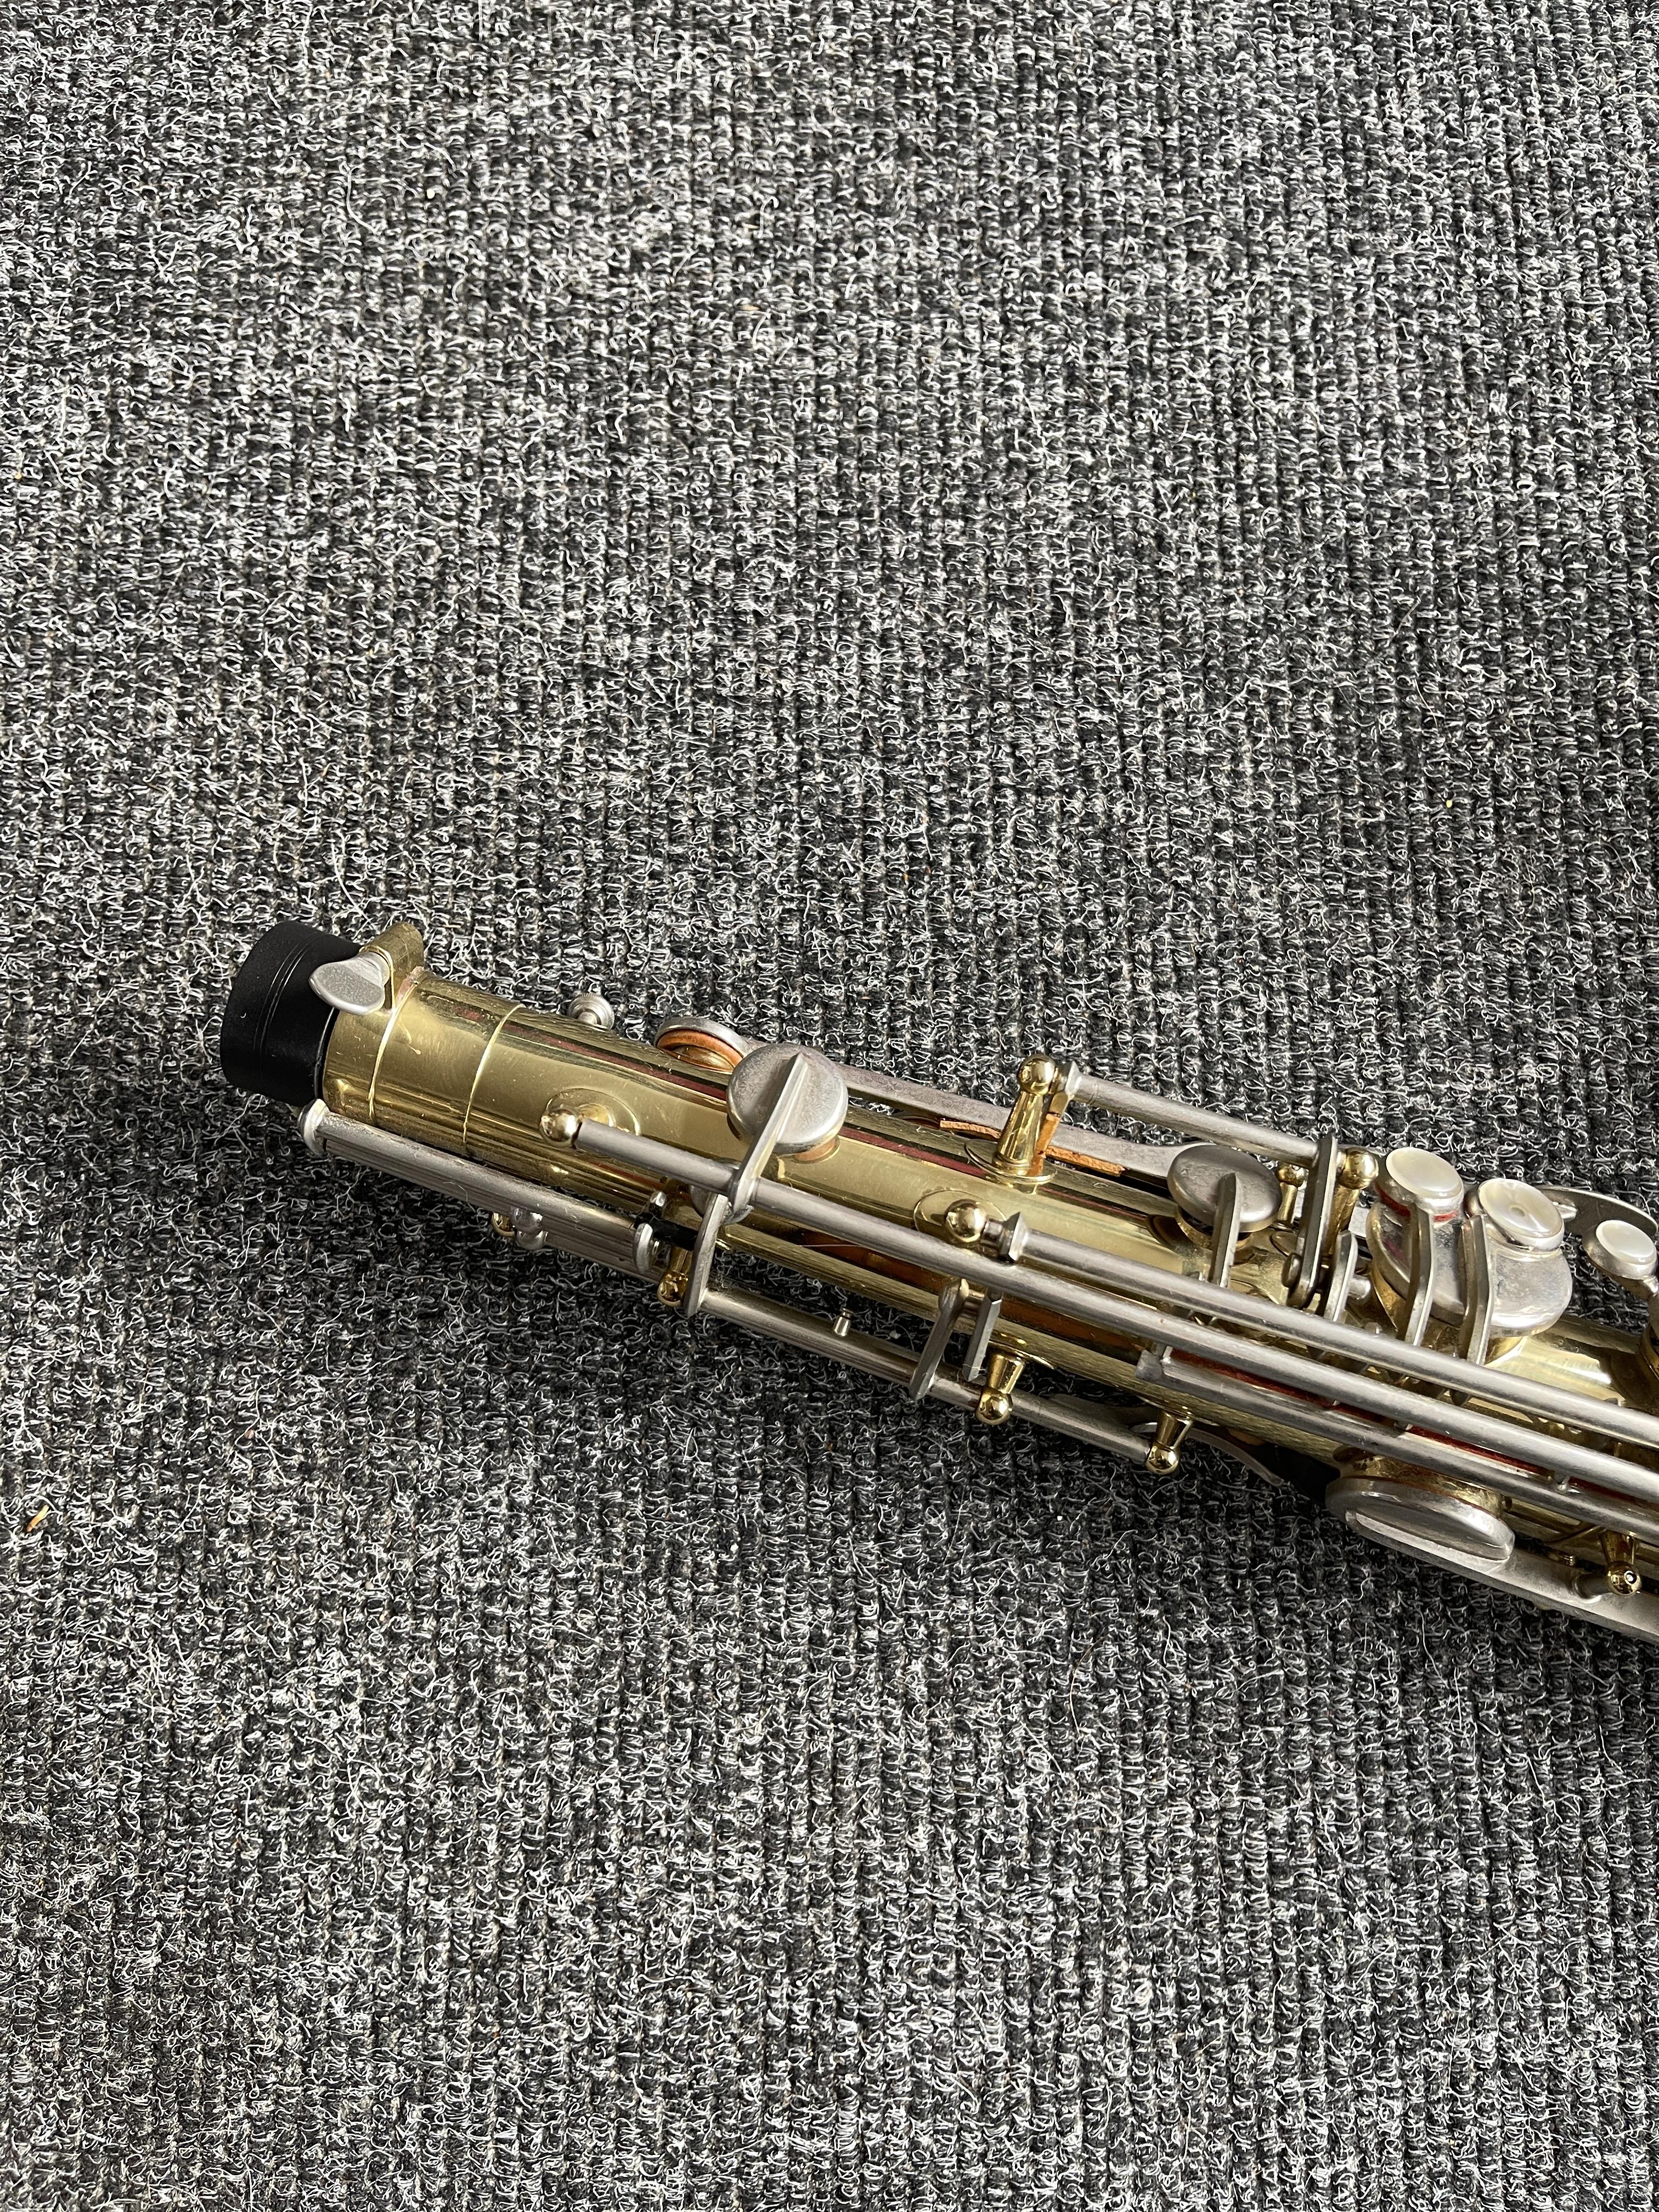 B&H 400 made for Boosey & Hawkes Cased Saxophone. - Image 4 of 31